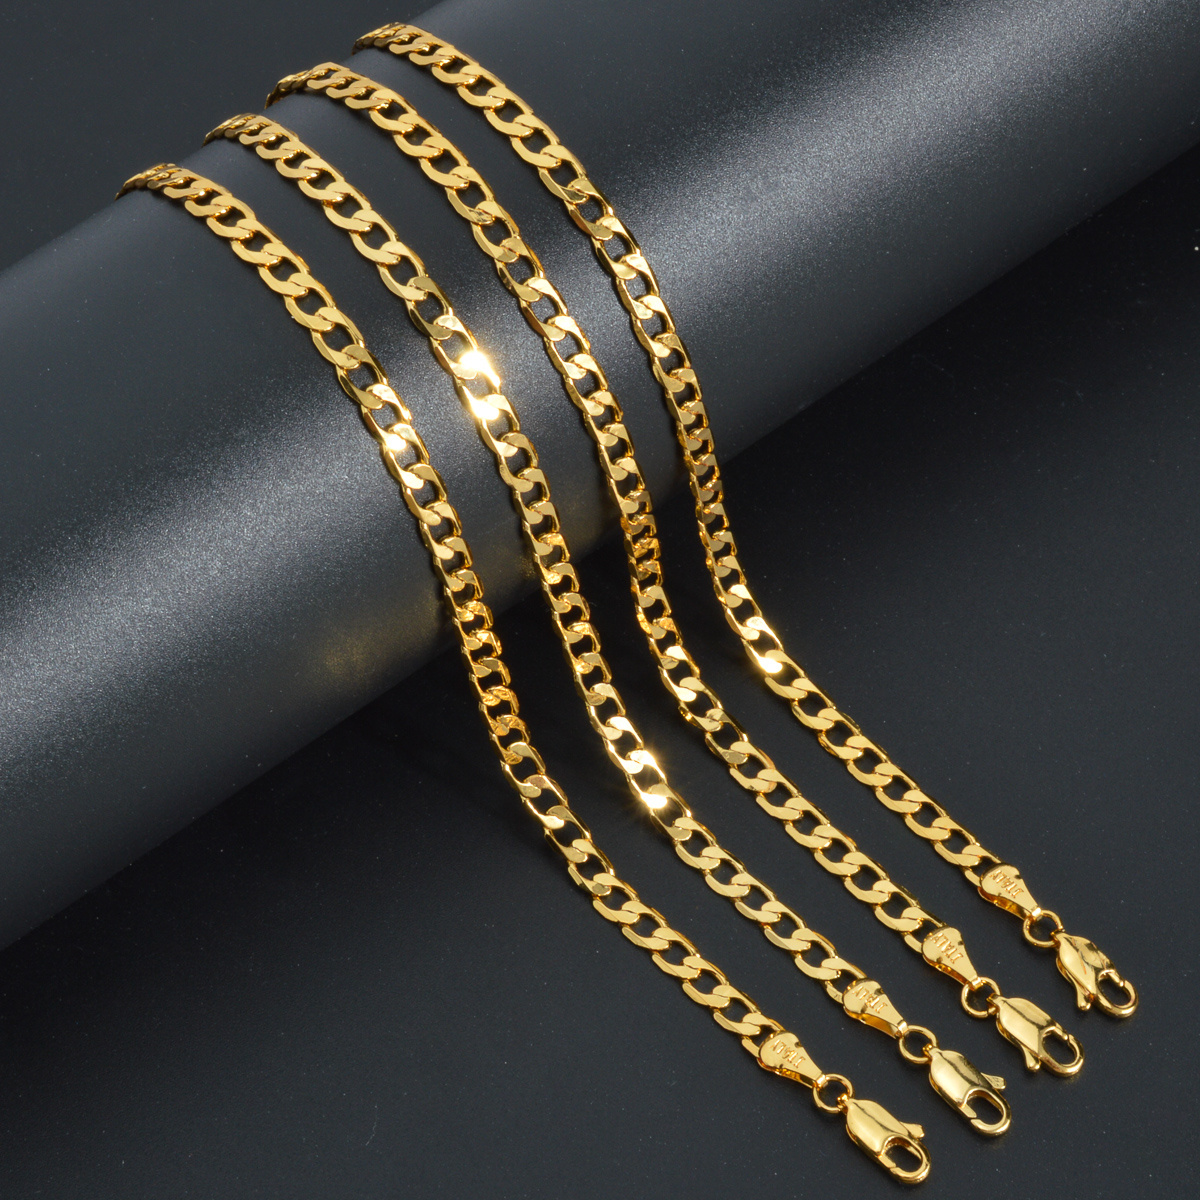 1pc 5mm Golden Link Chain Necklace For Men And Women - Durable Copper,  Electroplated With Golden Jewelry For Long-Lasting Shine And Style Jewelry